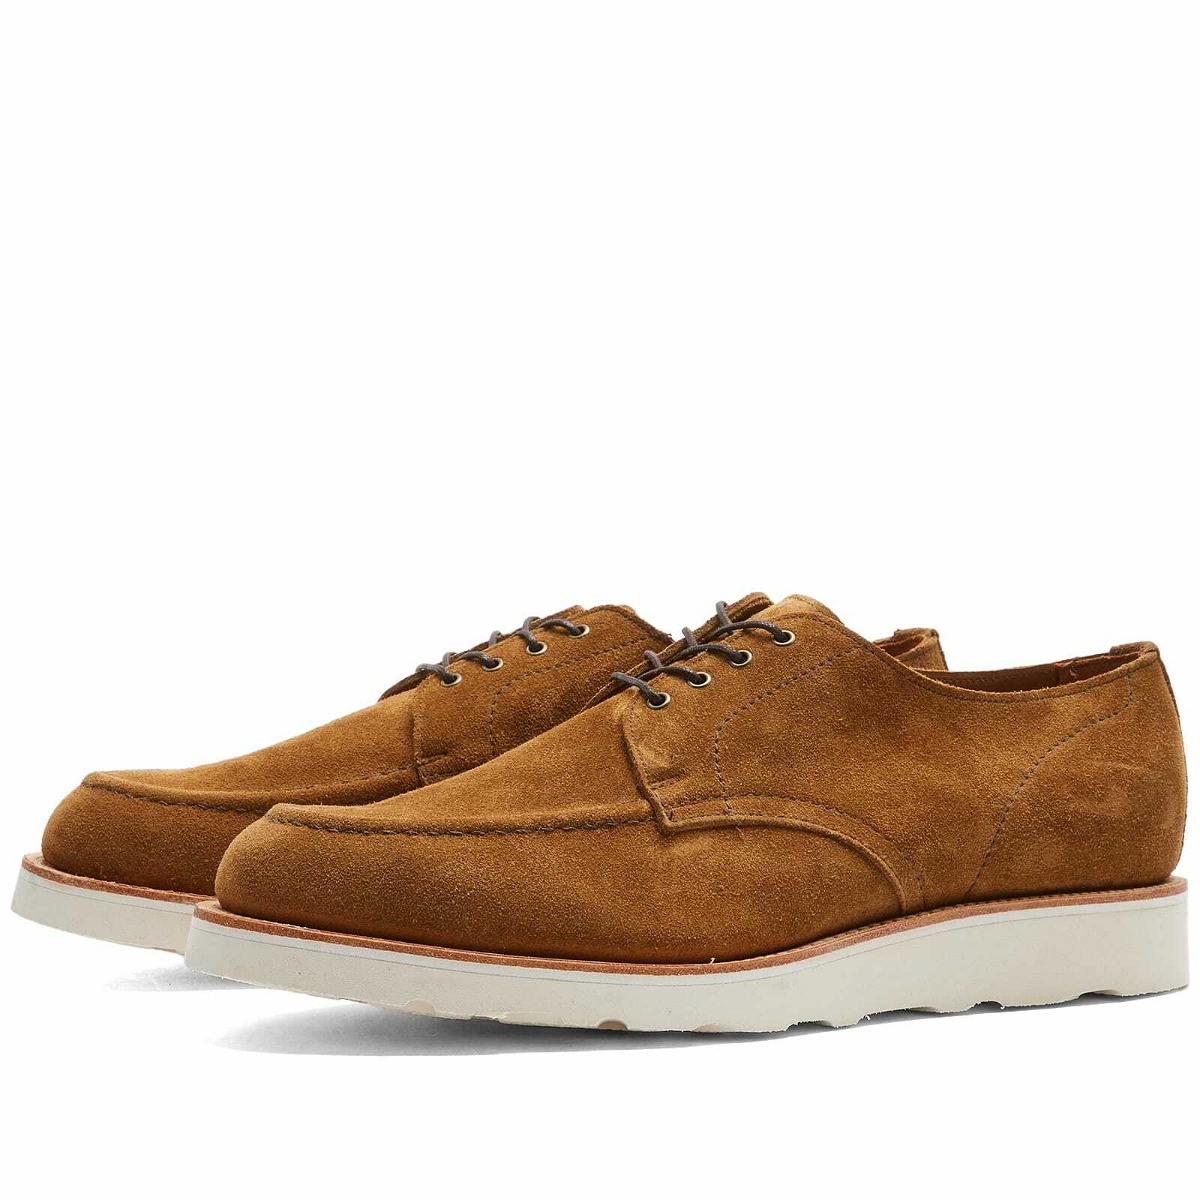 Photo: Sanders Men's Henry Apron Gibson in Tobacco Suede